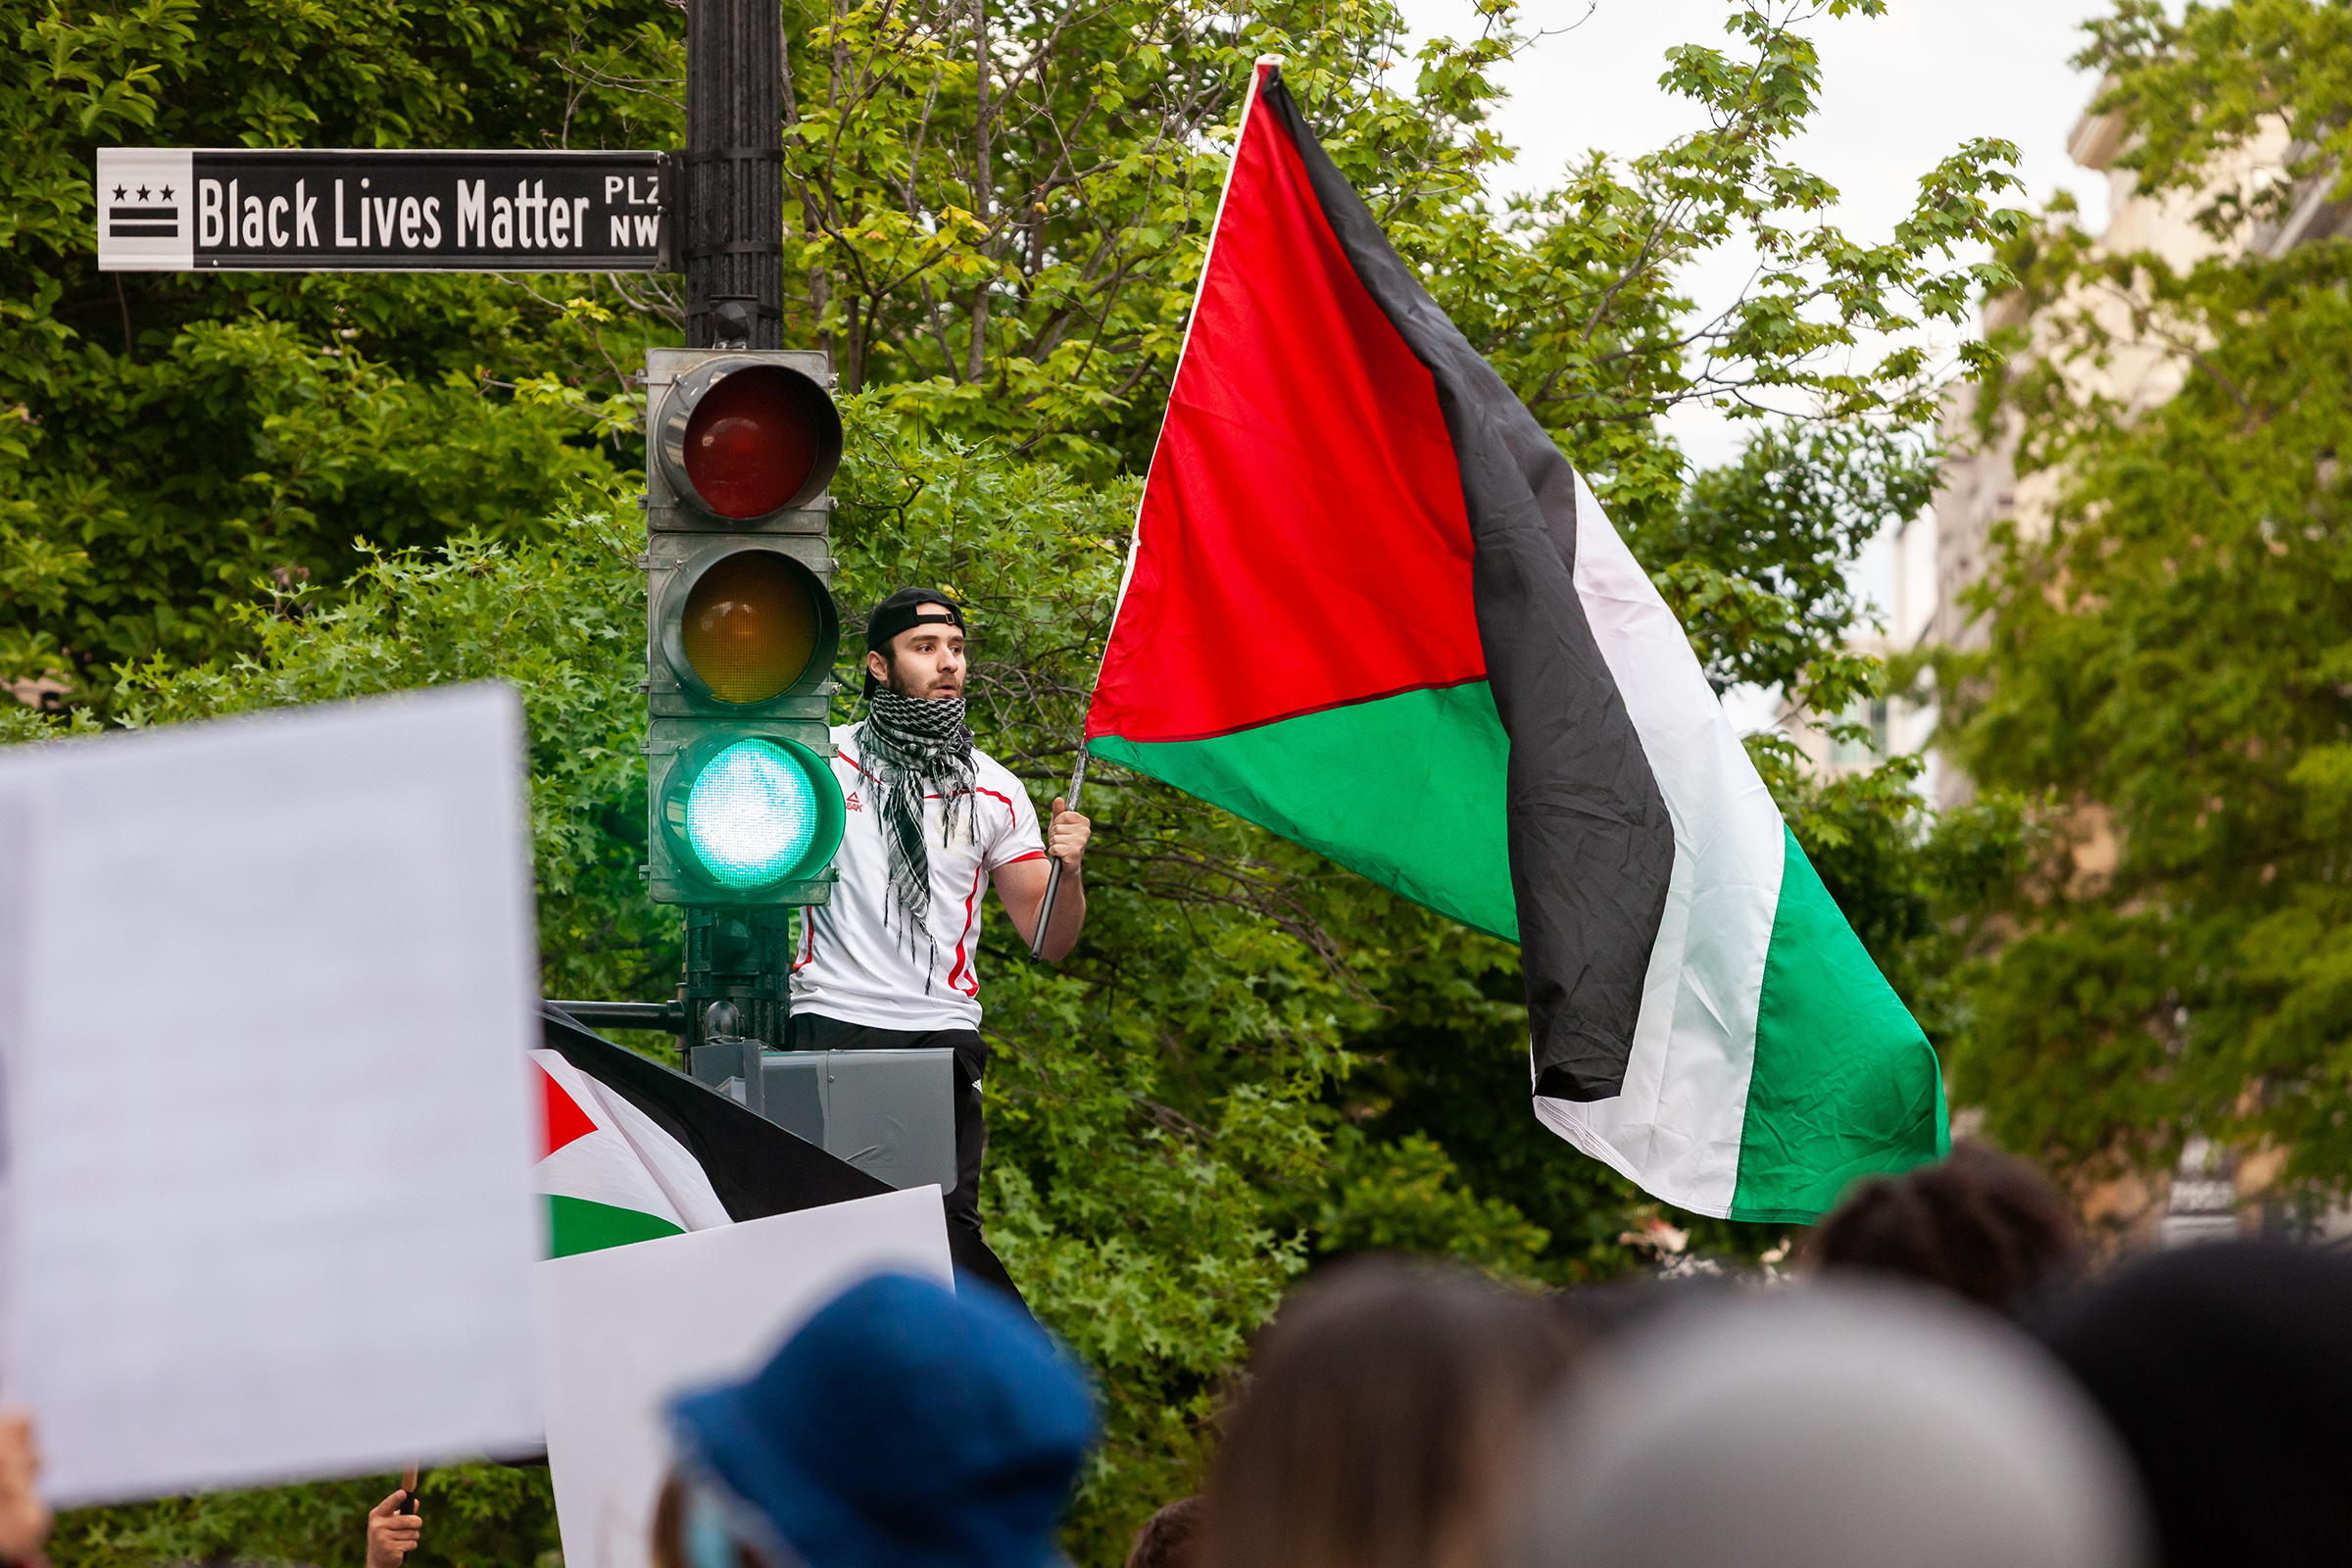 A man waves a Palestinian flag near the White House during a protest on May 11, 2021. Democratic Congresswoman Rashida Tlaib, who is of Palestinian descent, compared the Palestinian struggle to how Black Americans have risen up against police brutality in the past year. (Allison Bailey—Shutterstock)